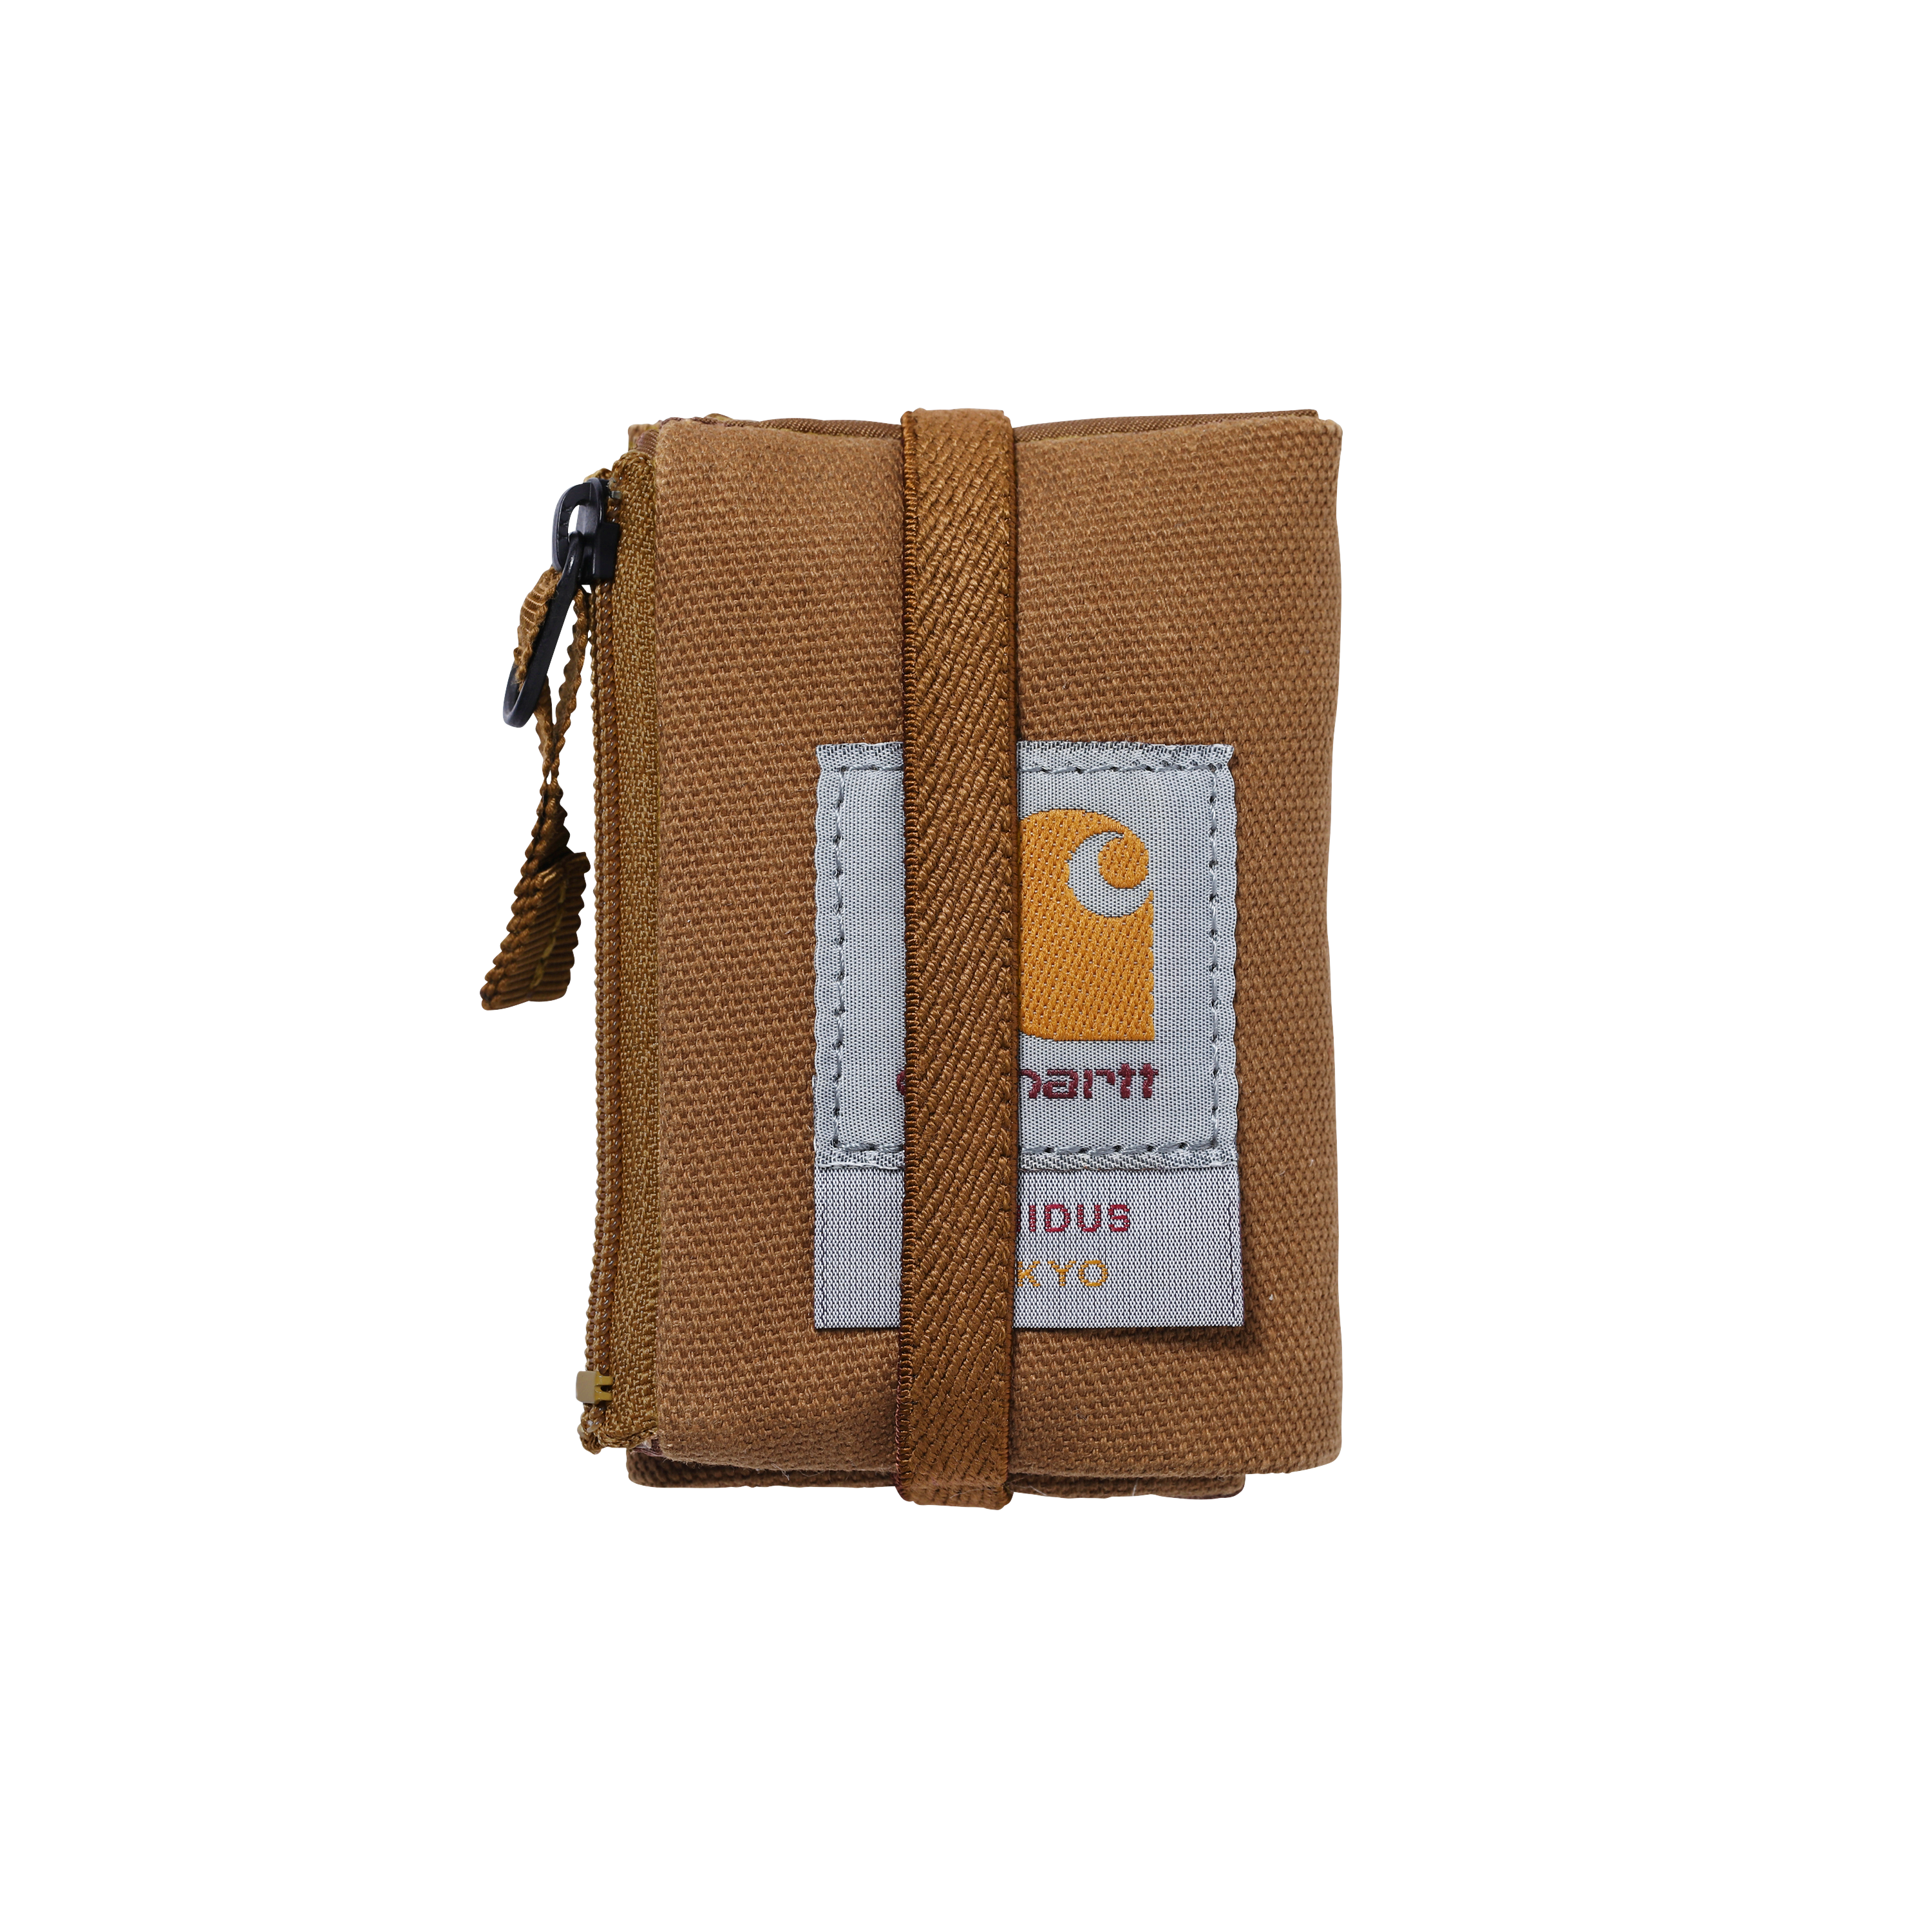 Carhartt WIP x RAMIDUS Wallet Pouch WIP White in Cotton - US